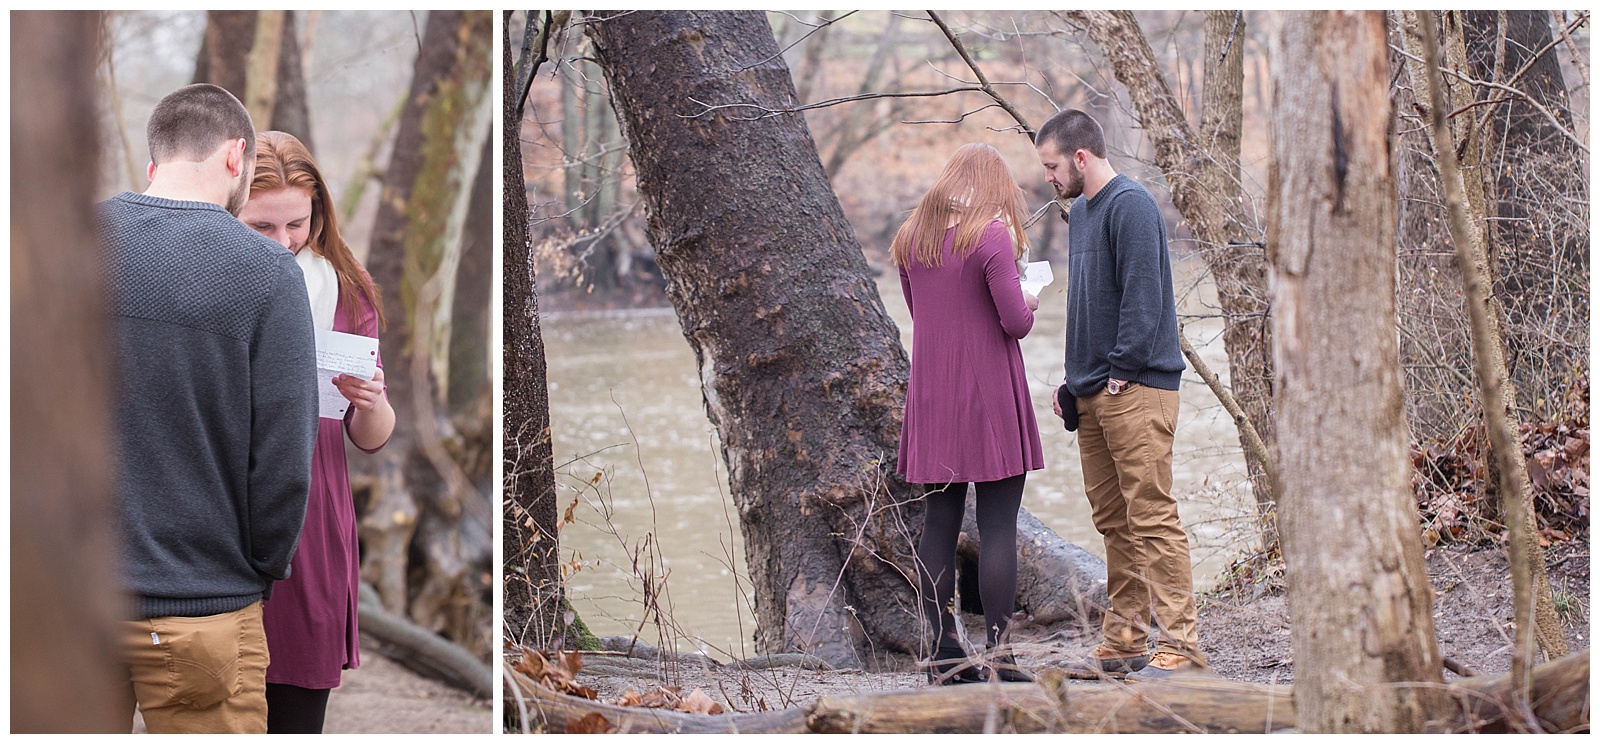 Tree Farm Proposal in Columbus, Newly Engaged | Monica Brown Photography | monicabrownphoto.com